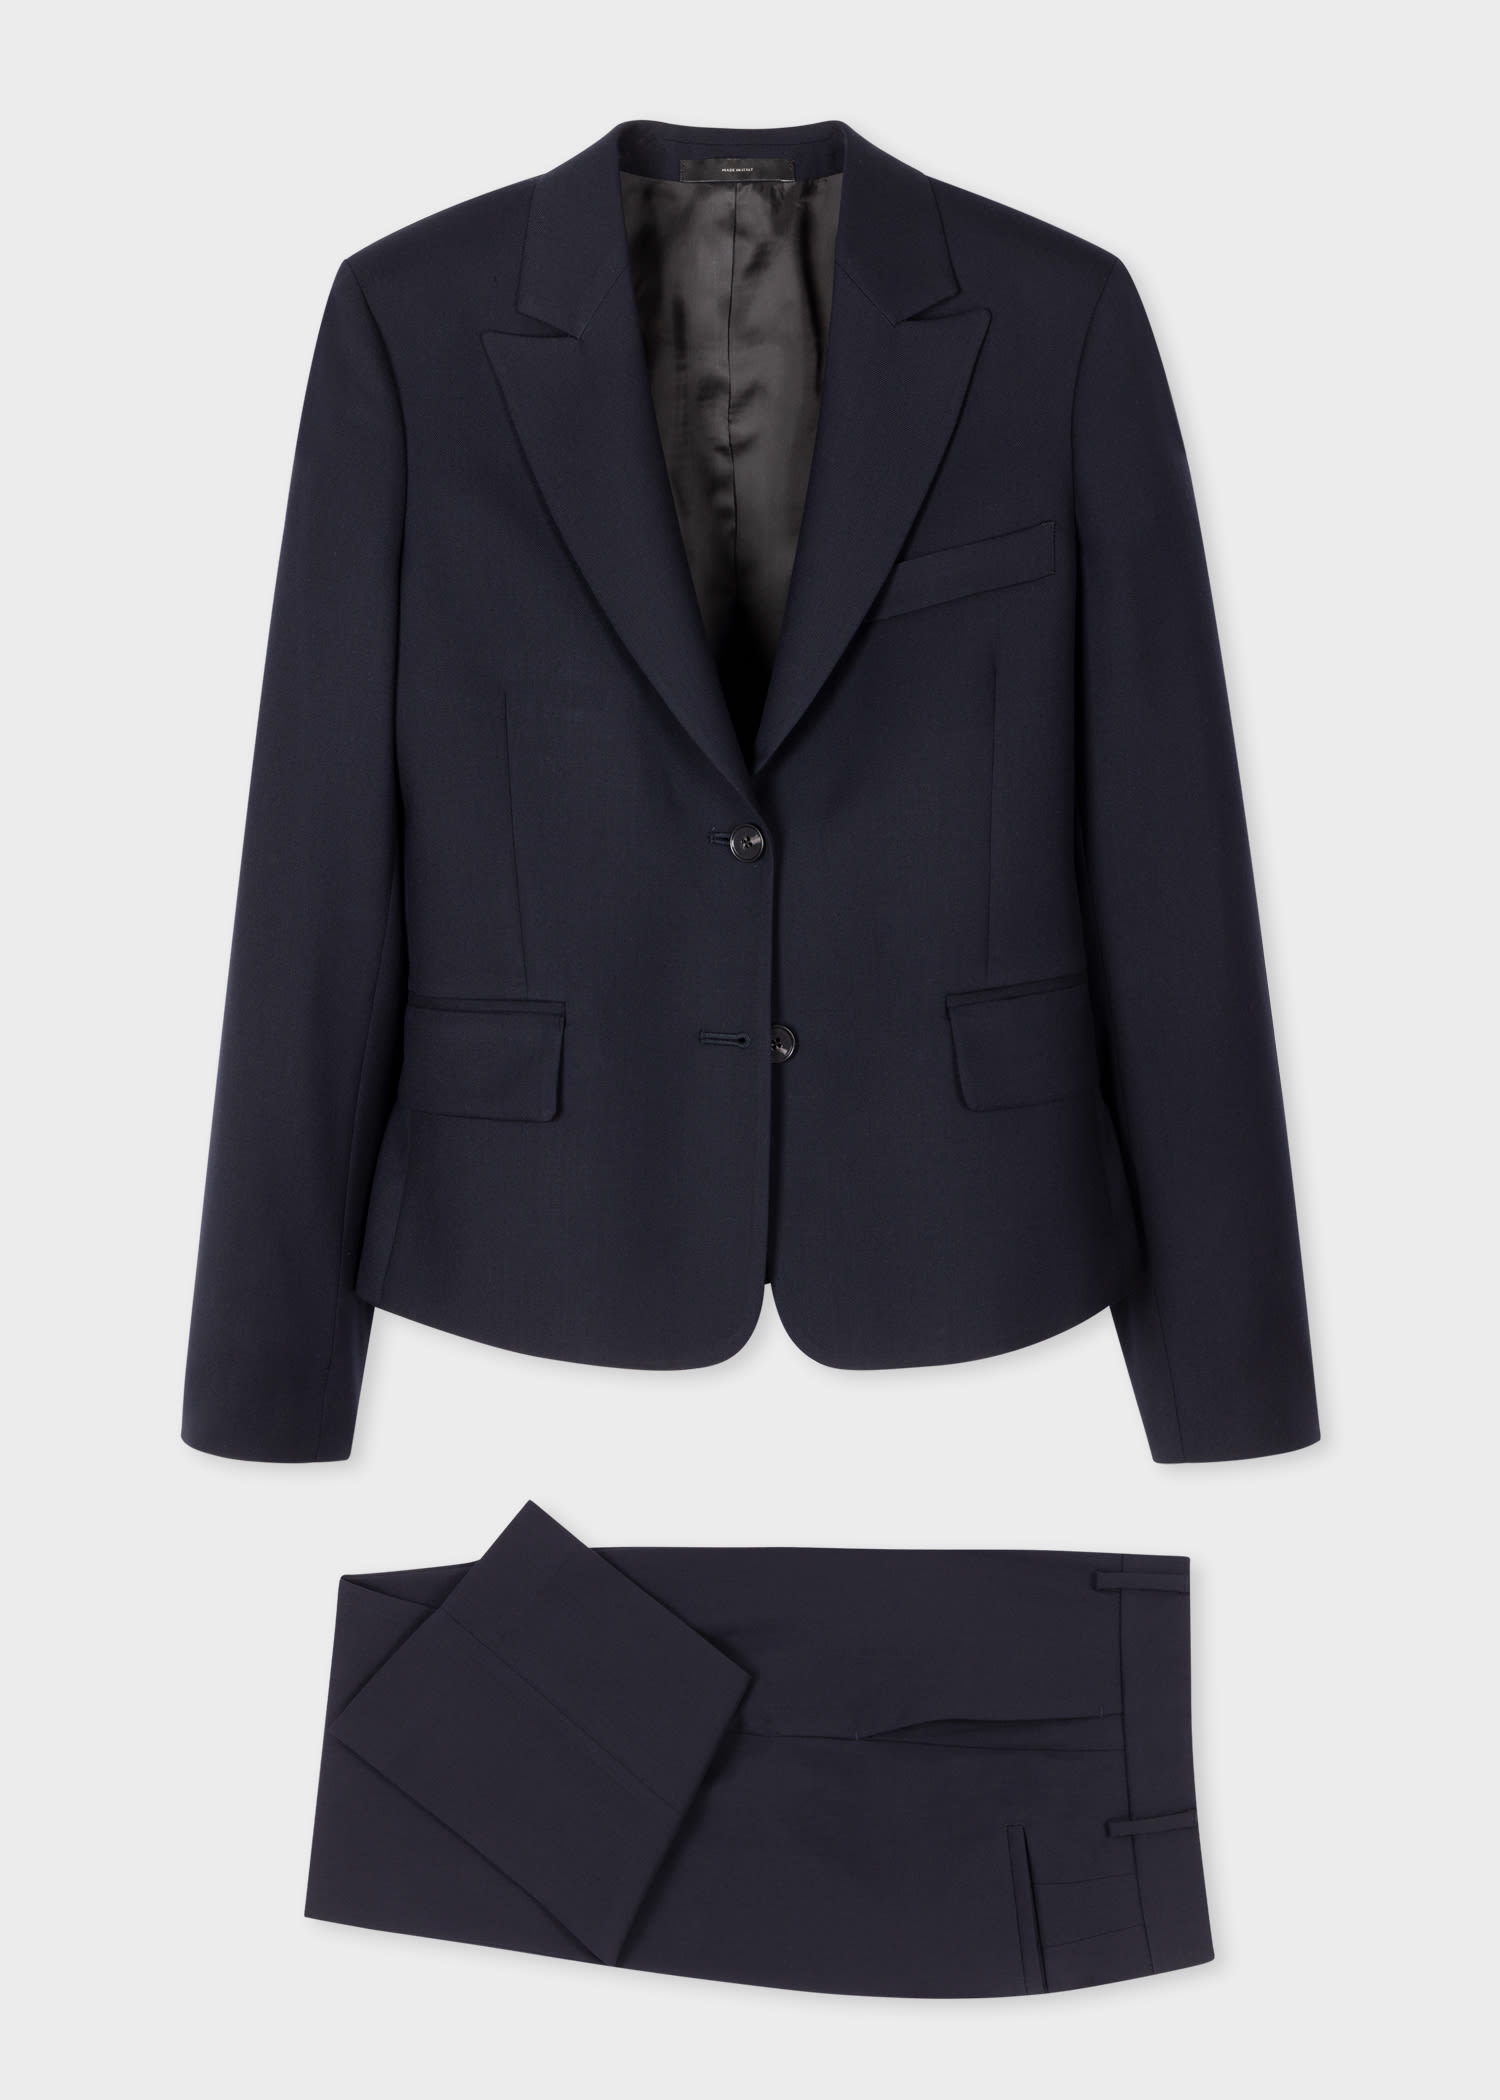 Women's Slim-Fit Navy Wool Cropped 'A Suit To Travel In' Suit